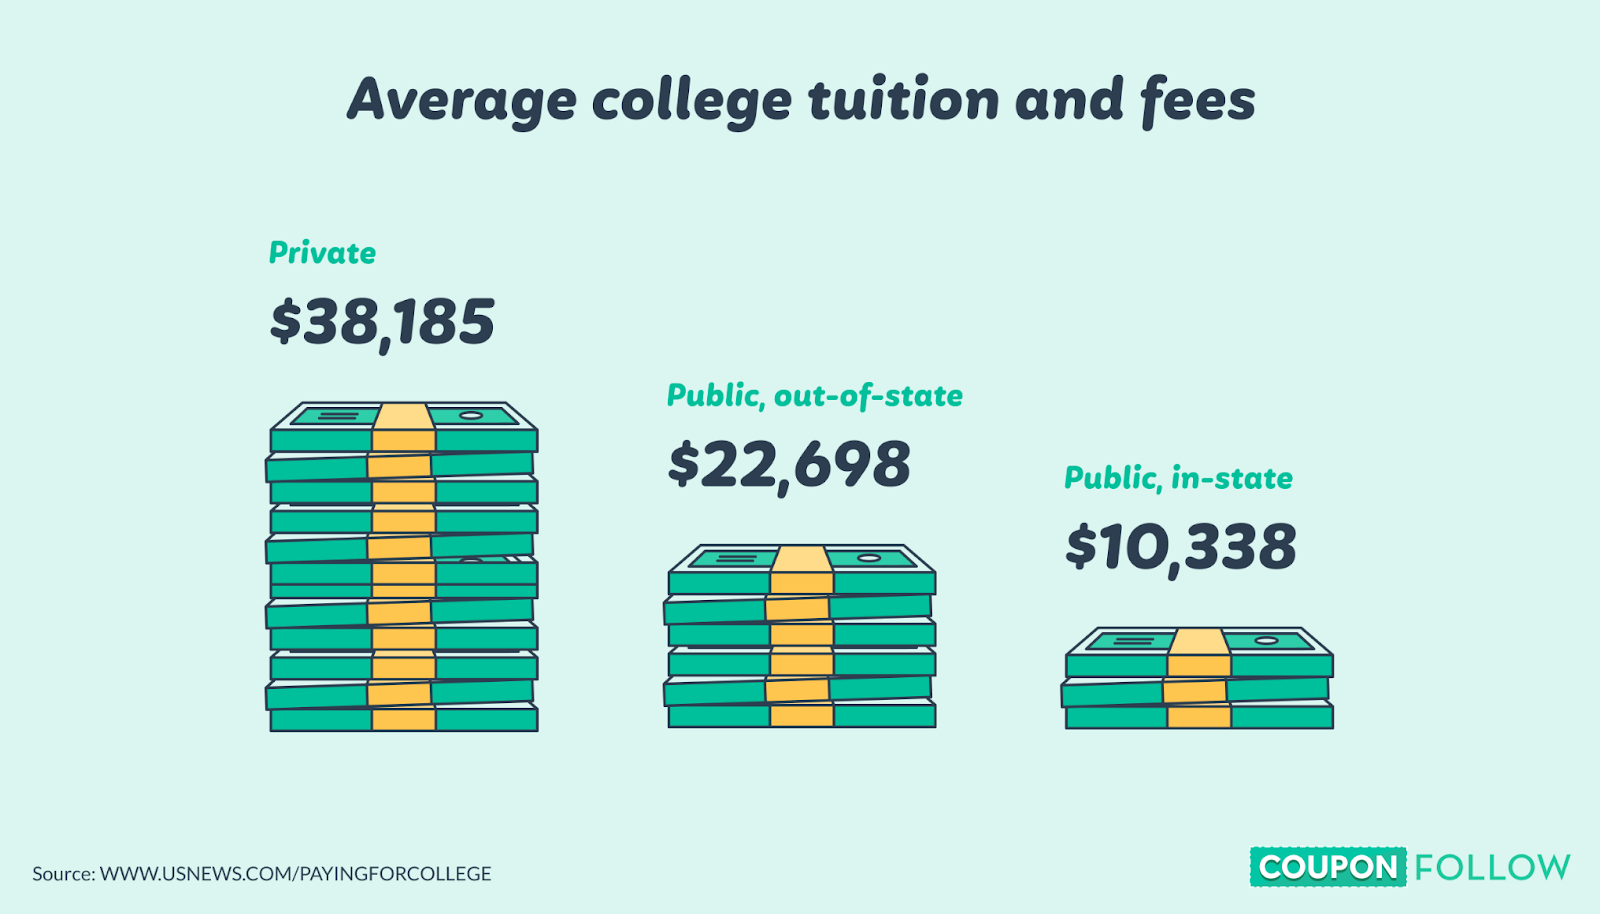 Average tuition and fees at private and public colleges